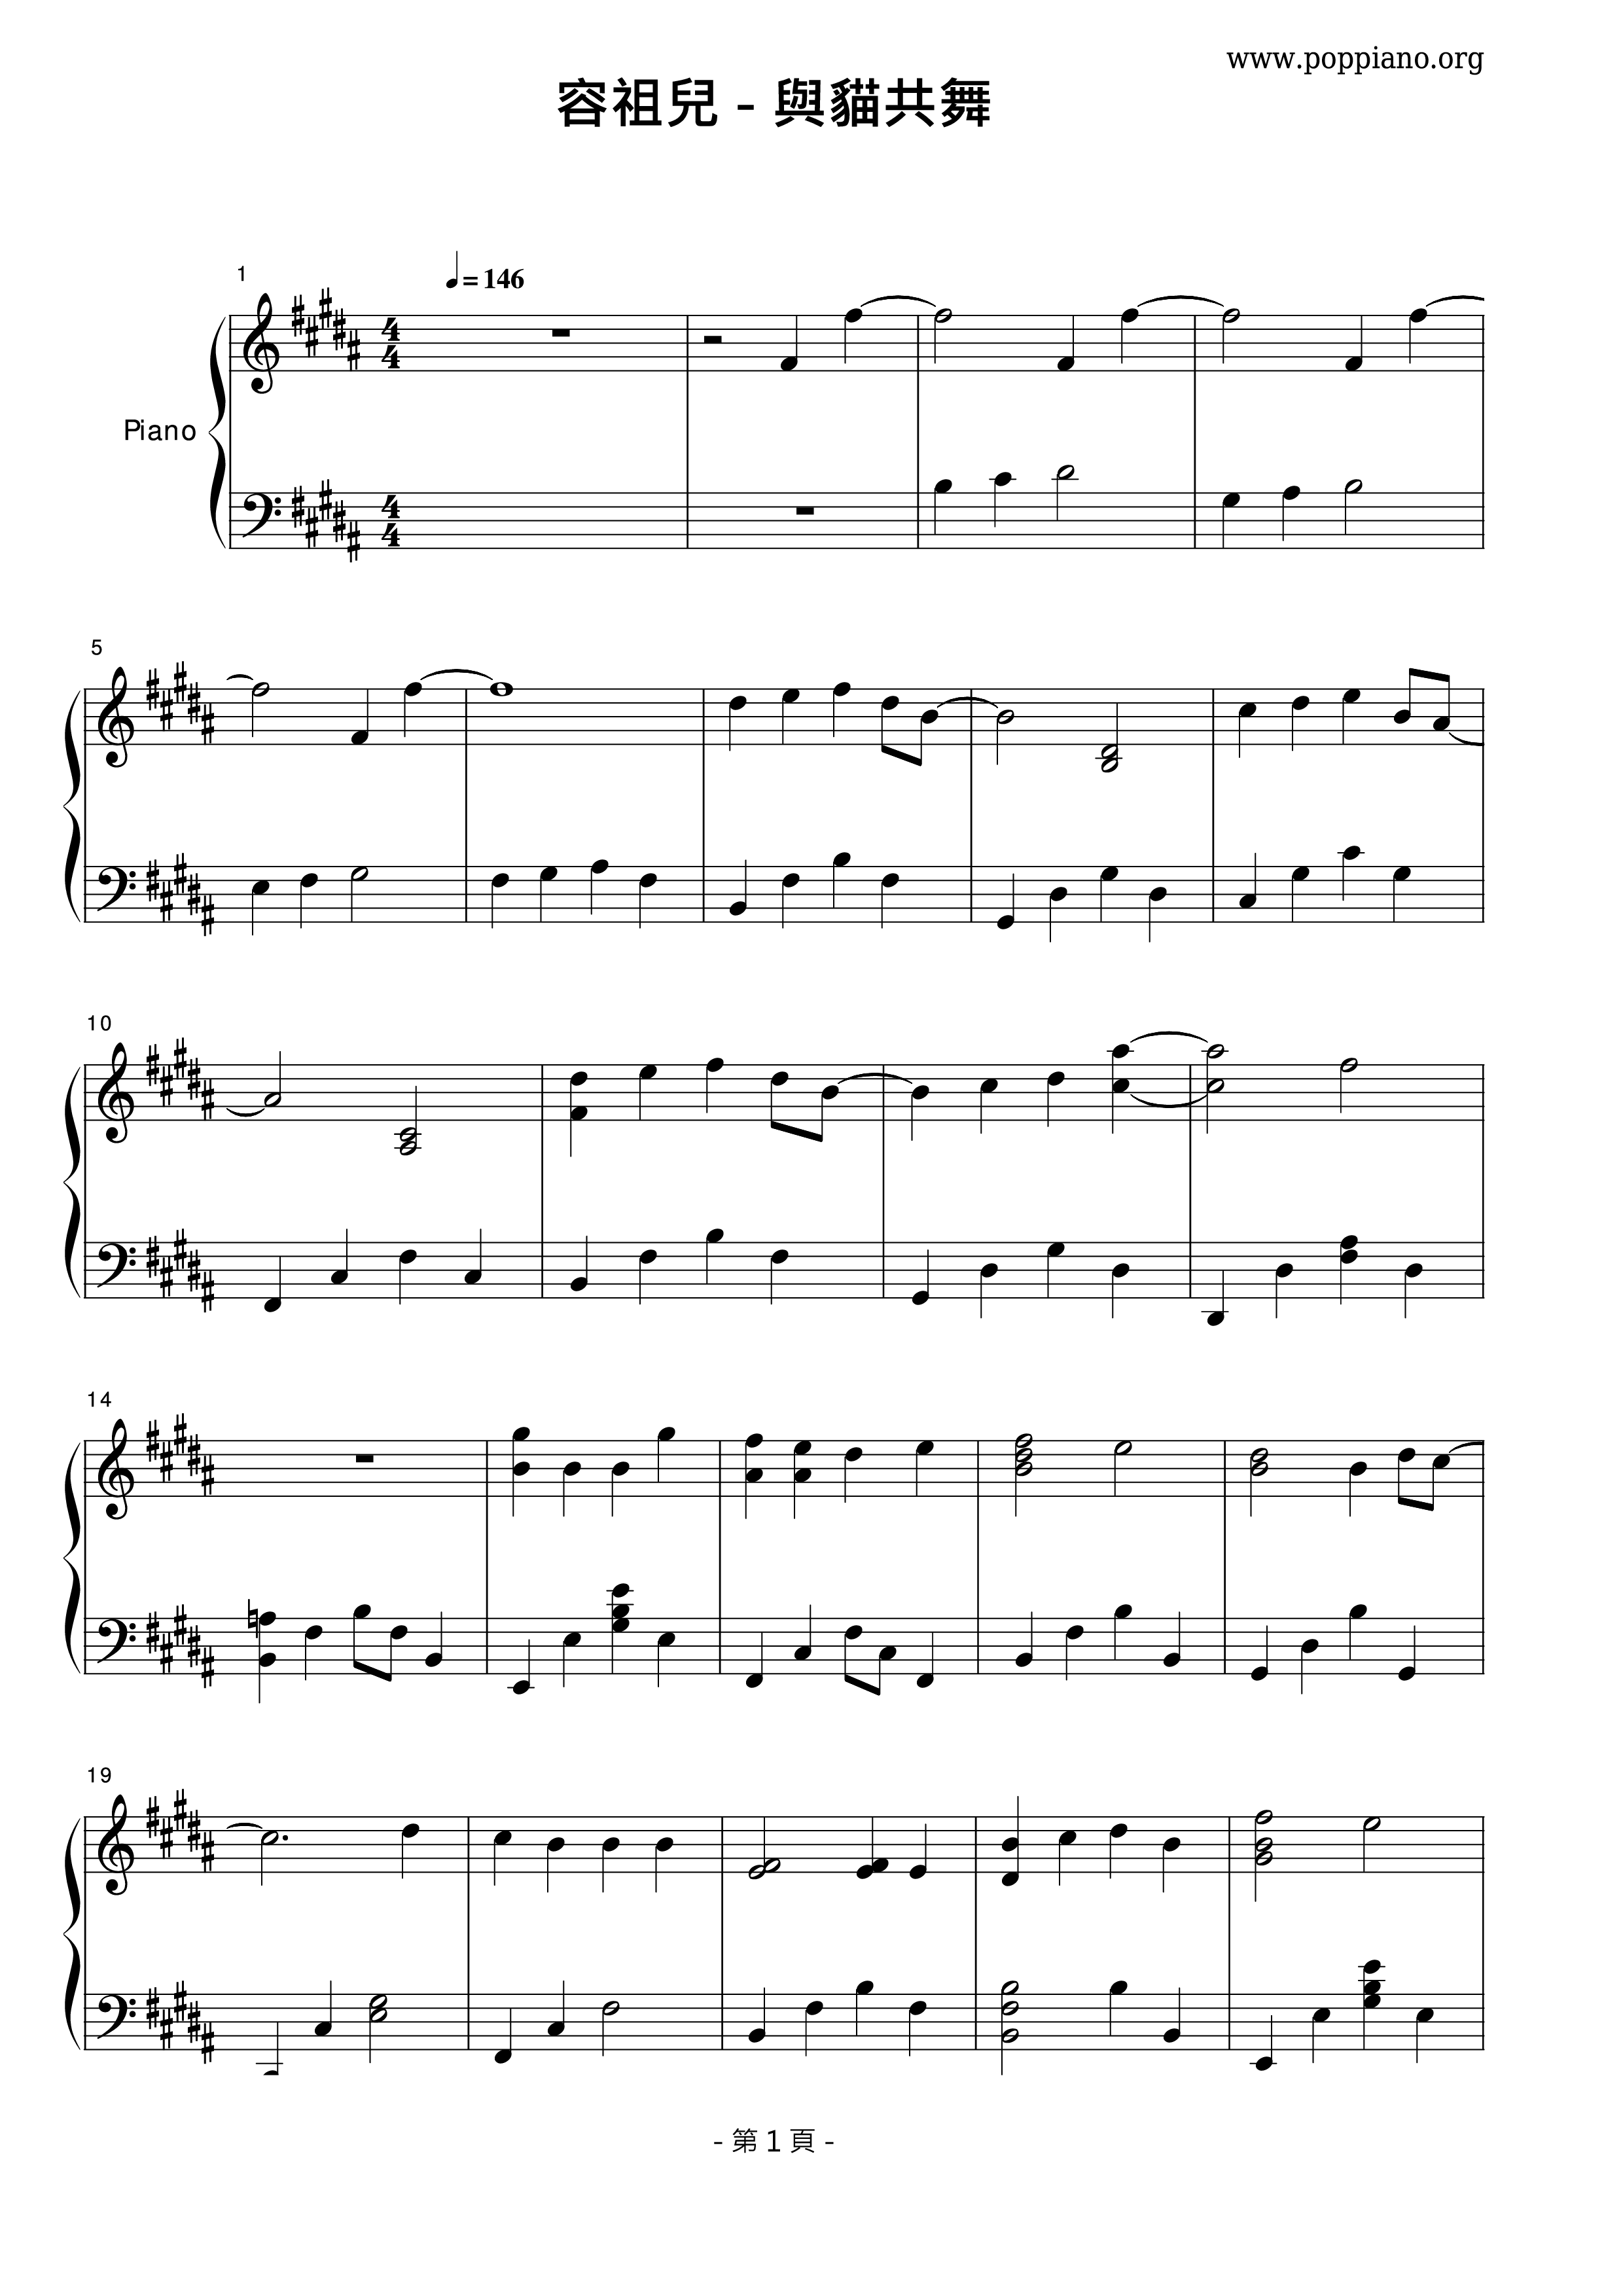 With Cats Dance Together Score